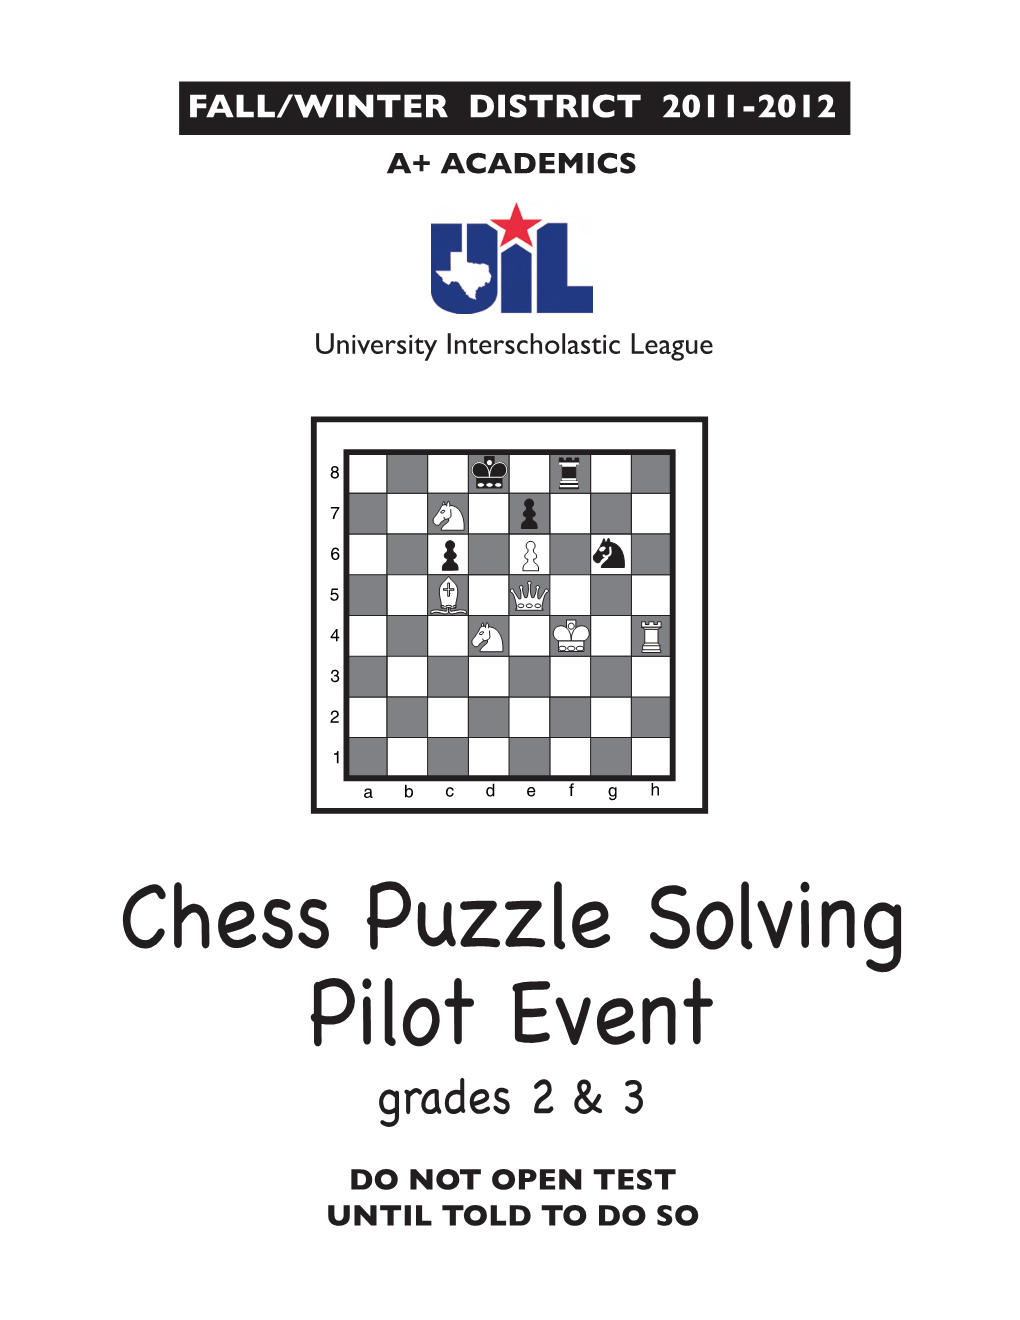 Chess Puzzle Solving Pilot Event Grades 2 & 3 Do Not Open Test Until Told to Do So Instructions for UIL Chess Puzzle Solving